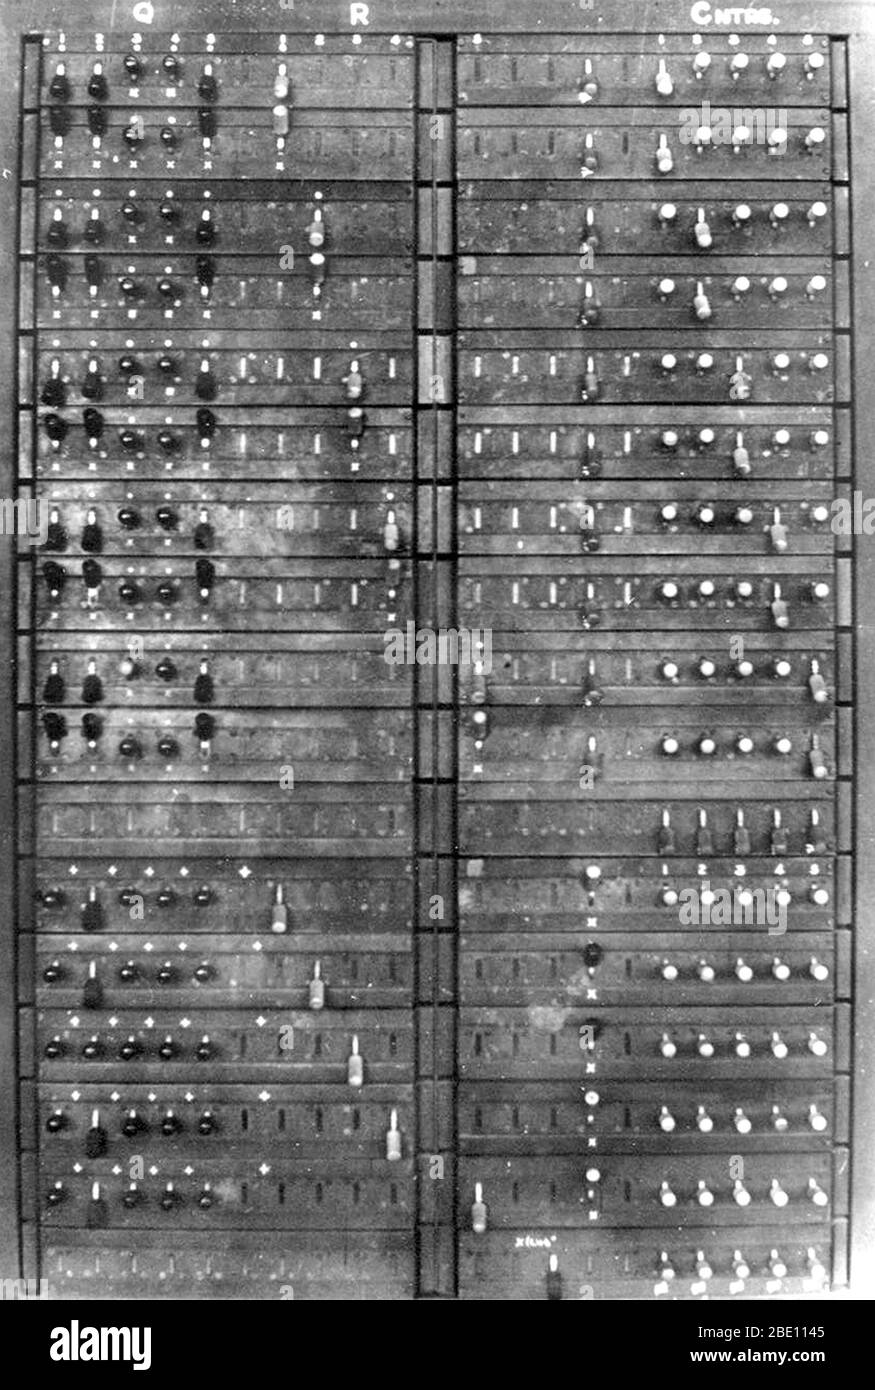 Wartime photograph of part of a Colossus computer showing the Q panel, 1945. Colossus was a set of computers developed by British codebreakers in the years 1943-1945 to help in the cryptanalysis of the Lorenz cipher used by the German Army. Colossus used thermionic valves (vacuum tubes) to perform Boolean and counting operations. Colossus is thus regarded as the world's first programmable, electronic, digital computer, although it was programmed by switches and plugs and not by a stored program. Colossus was designed by research telephone engineer Tommy Flowers. Alan Turing's use of probabilit Stock Photo